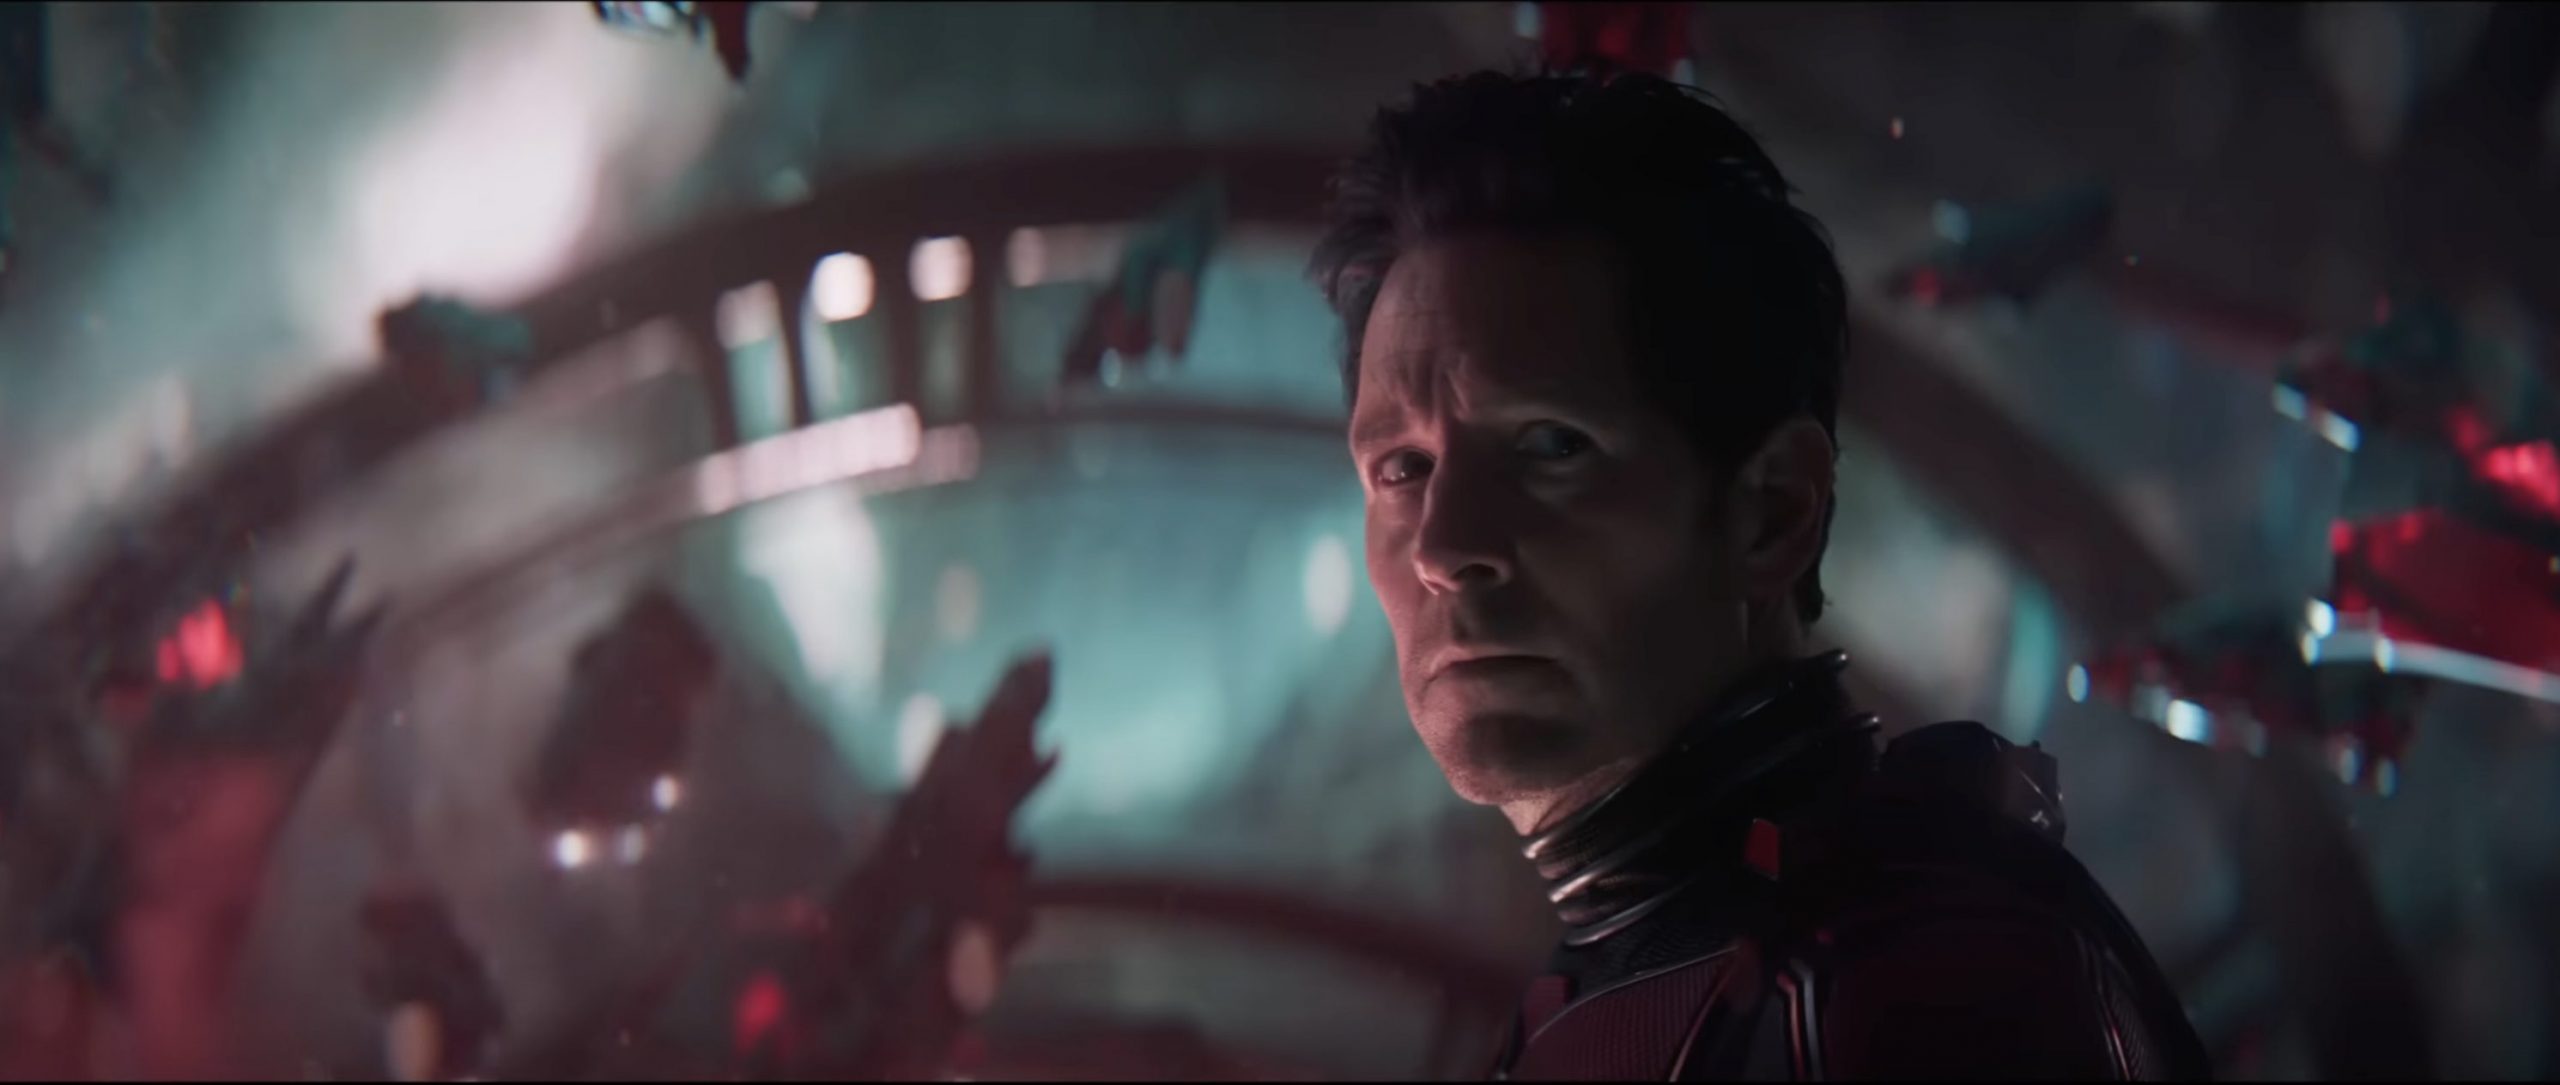 Screen grab from the trailer of the film, Ant-Man and the Wasp: Quantumania